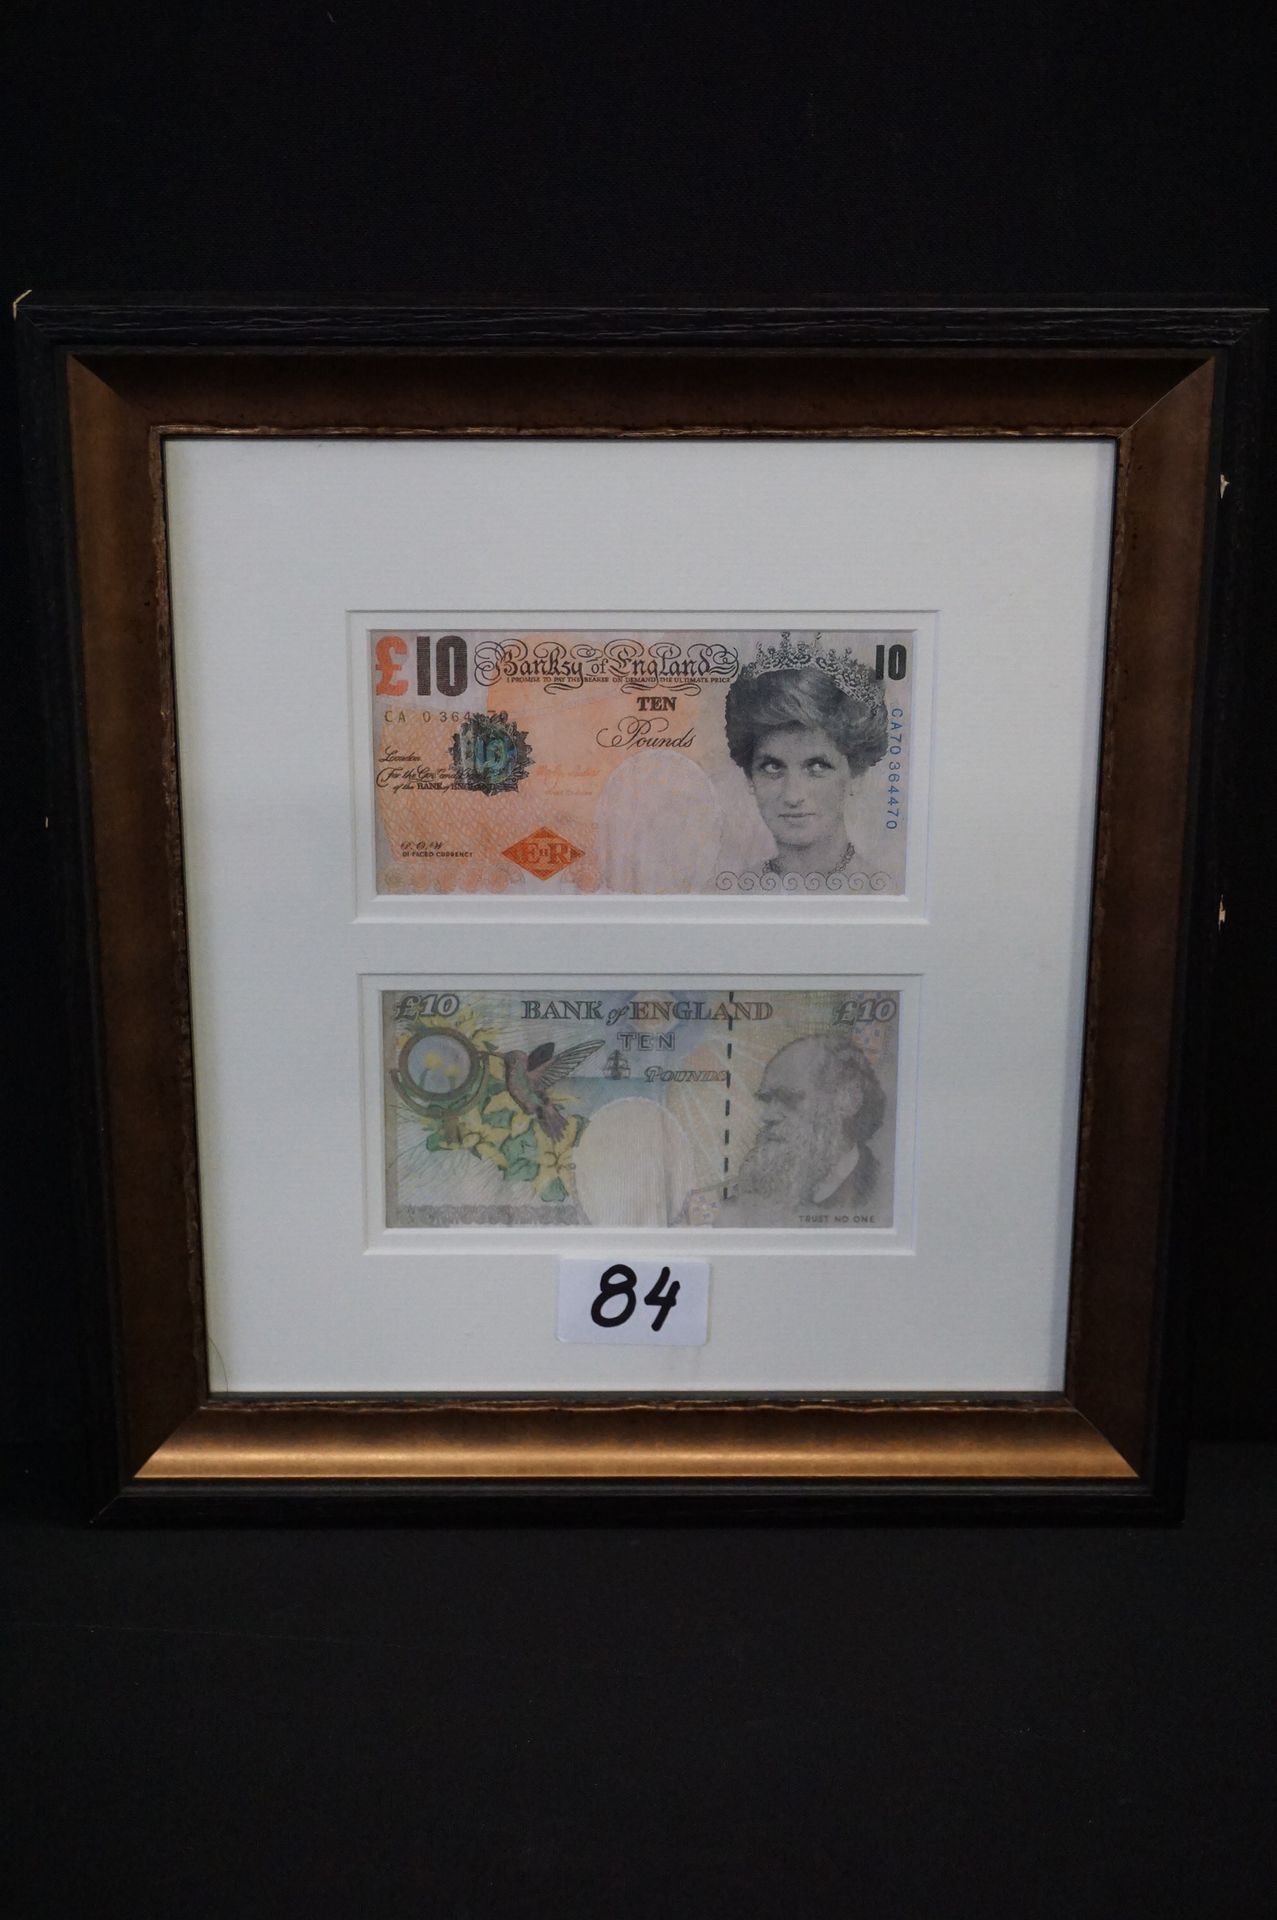 BANKSY "DI FACED TENNER" - Double décalage